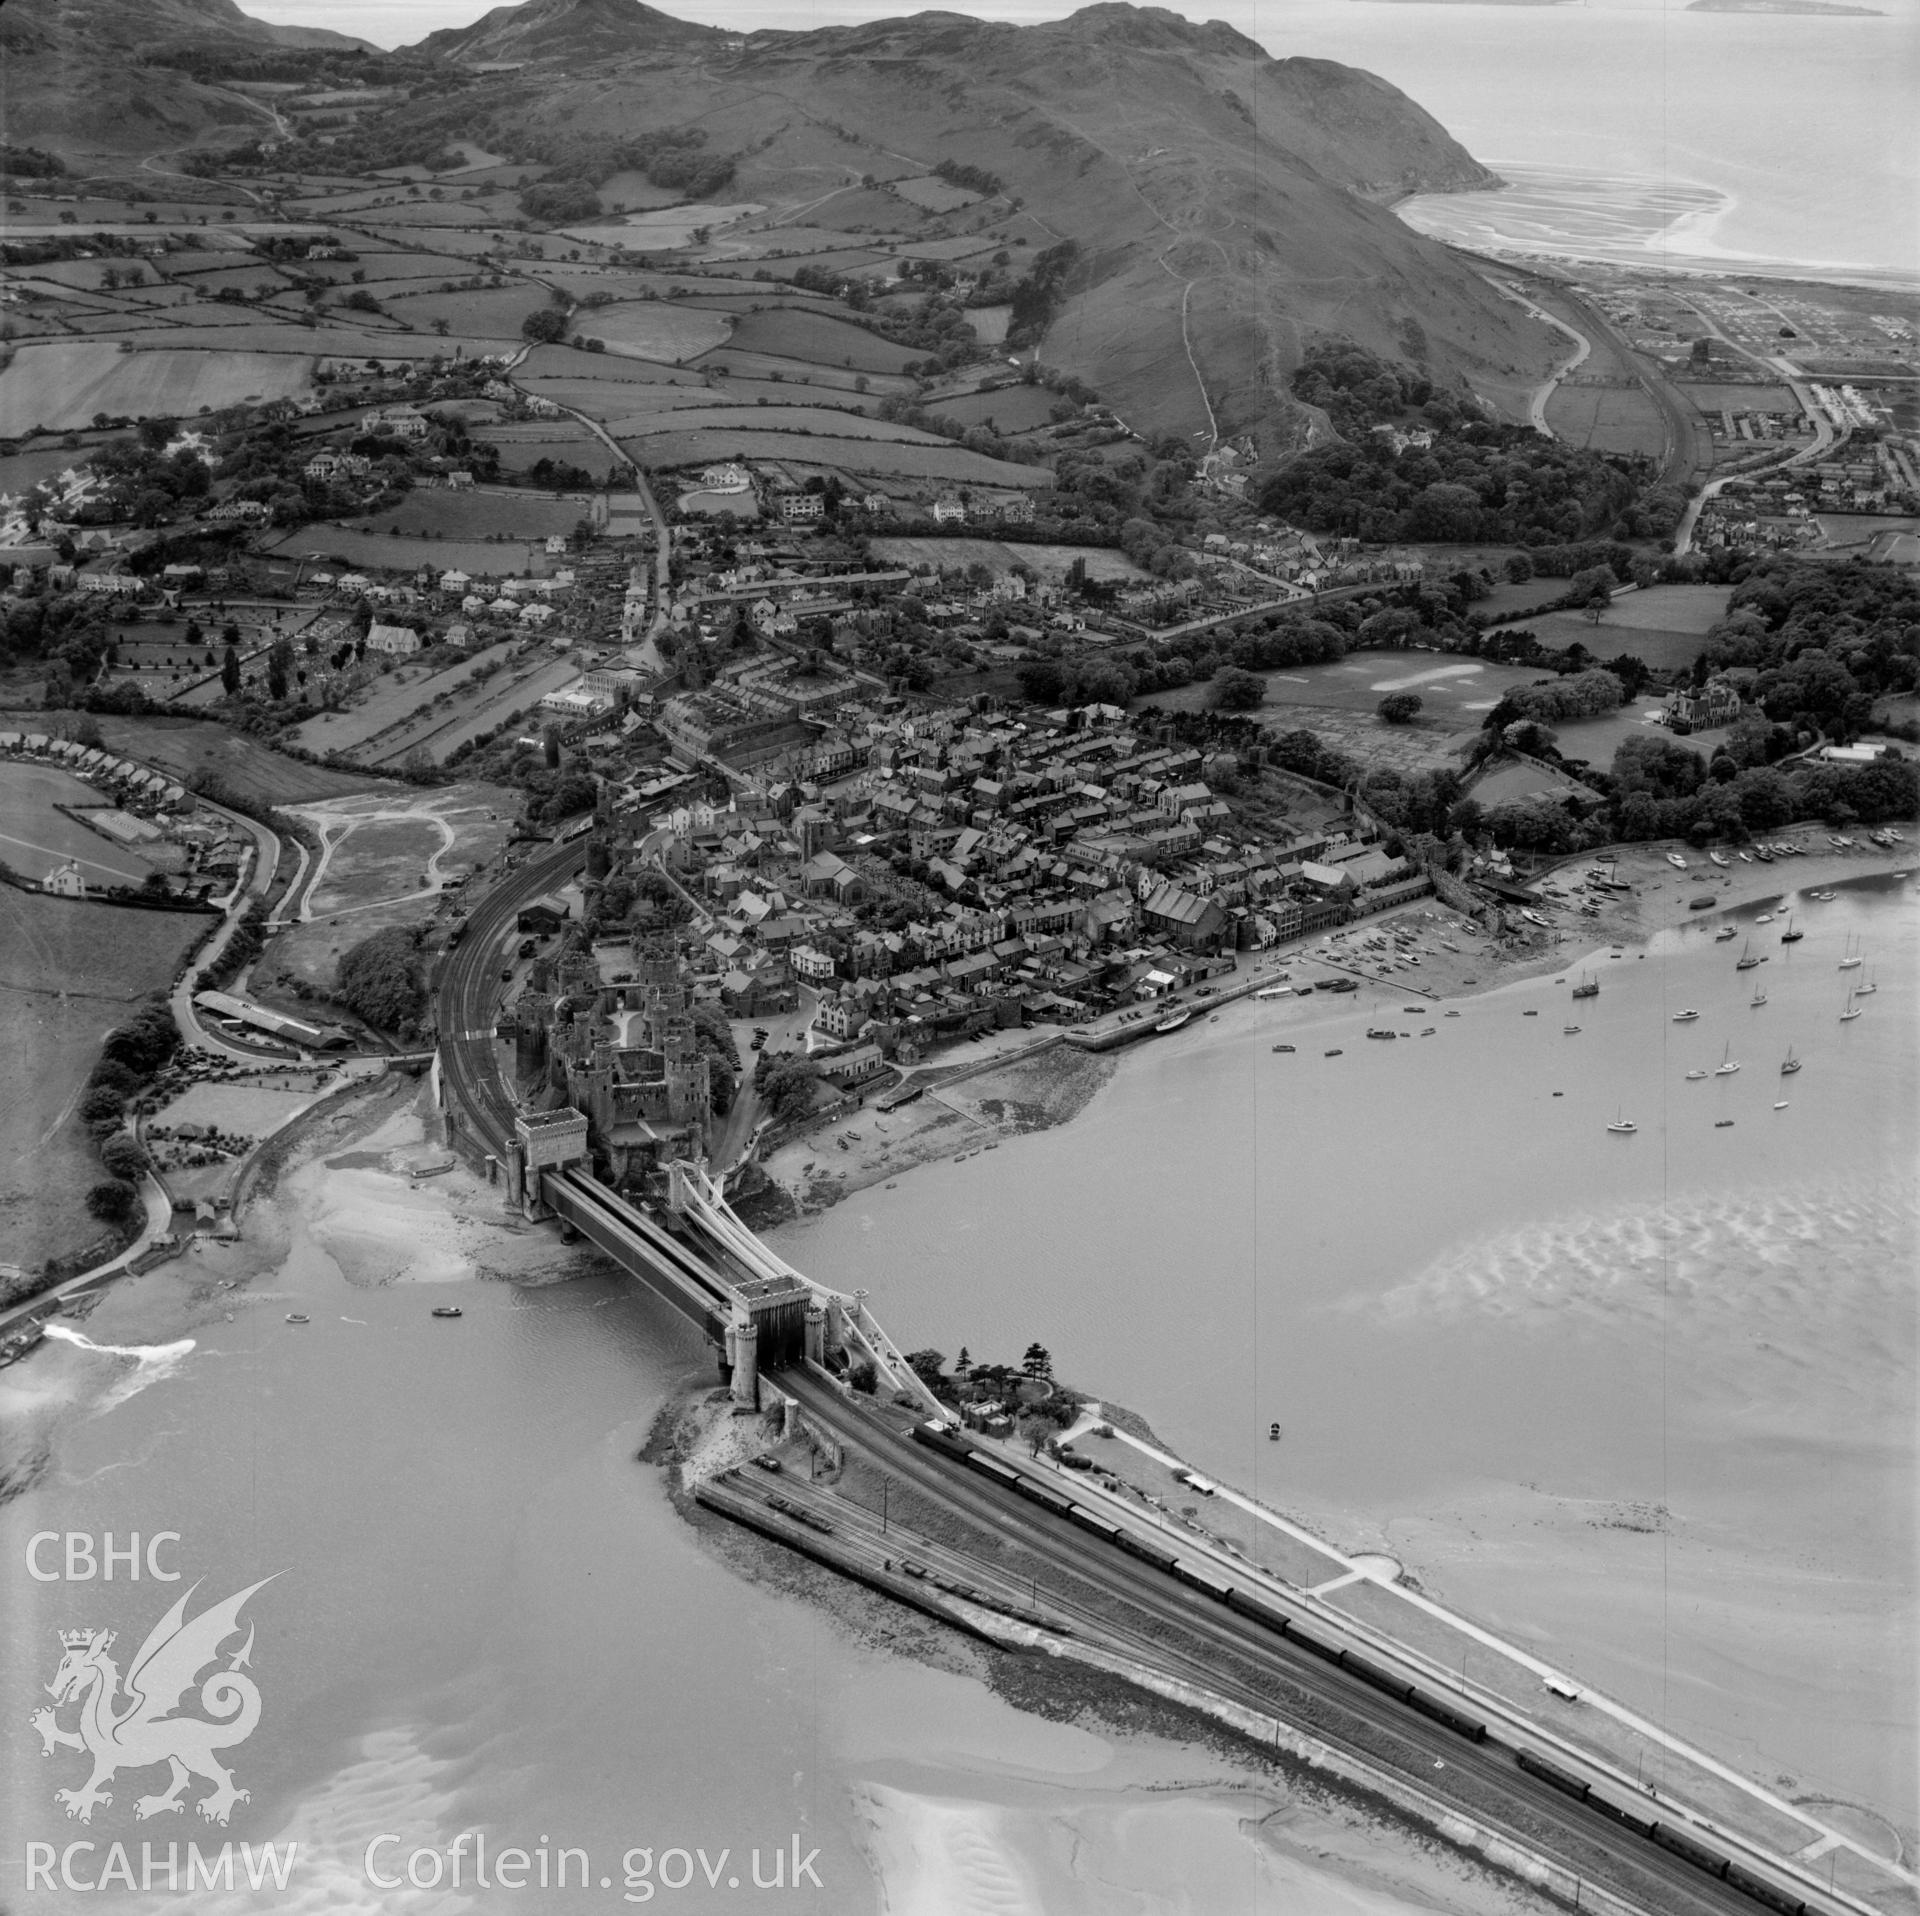 General view of Conwy showing Blodlondeb woods and mansion